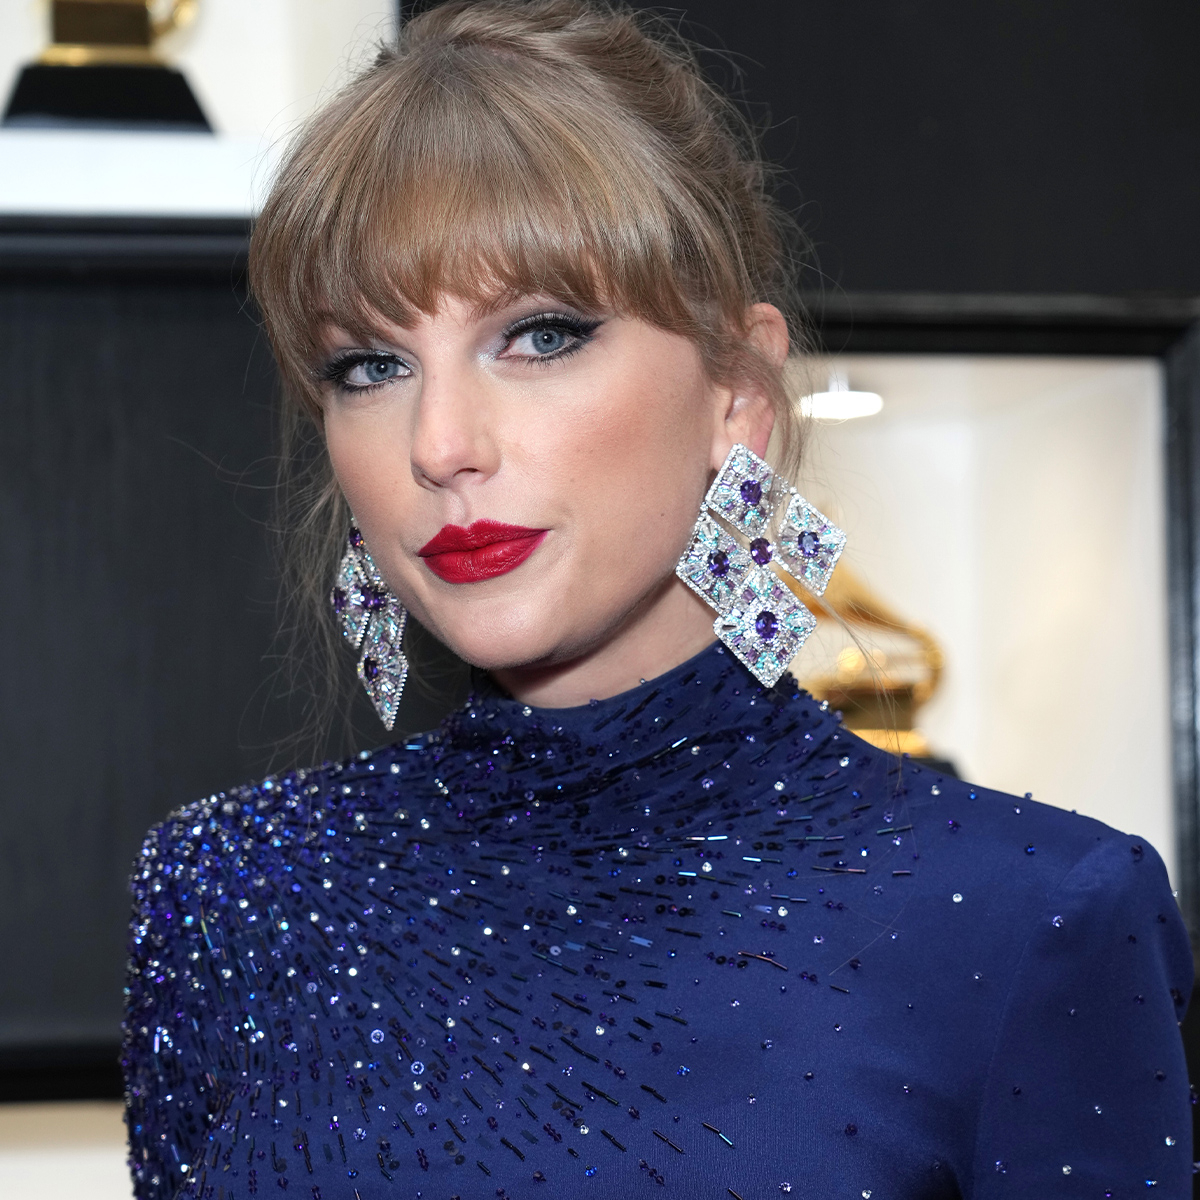 Taylor Swift “Completely in Shock” After Stabbing Attack in England